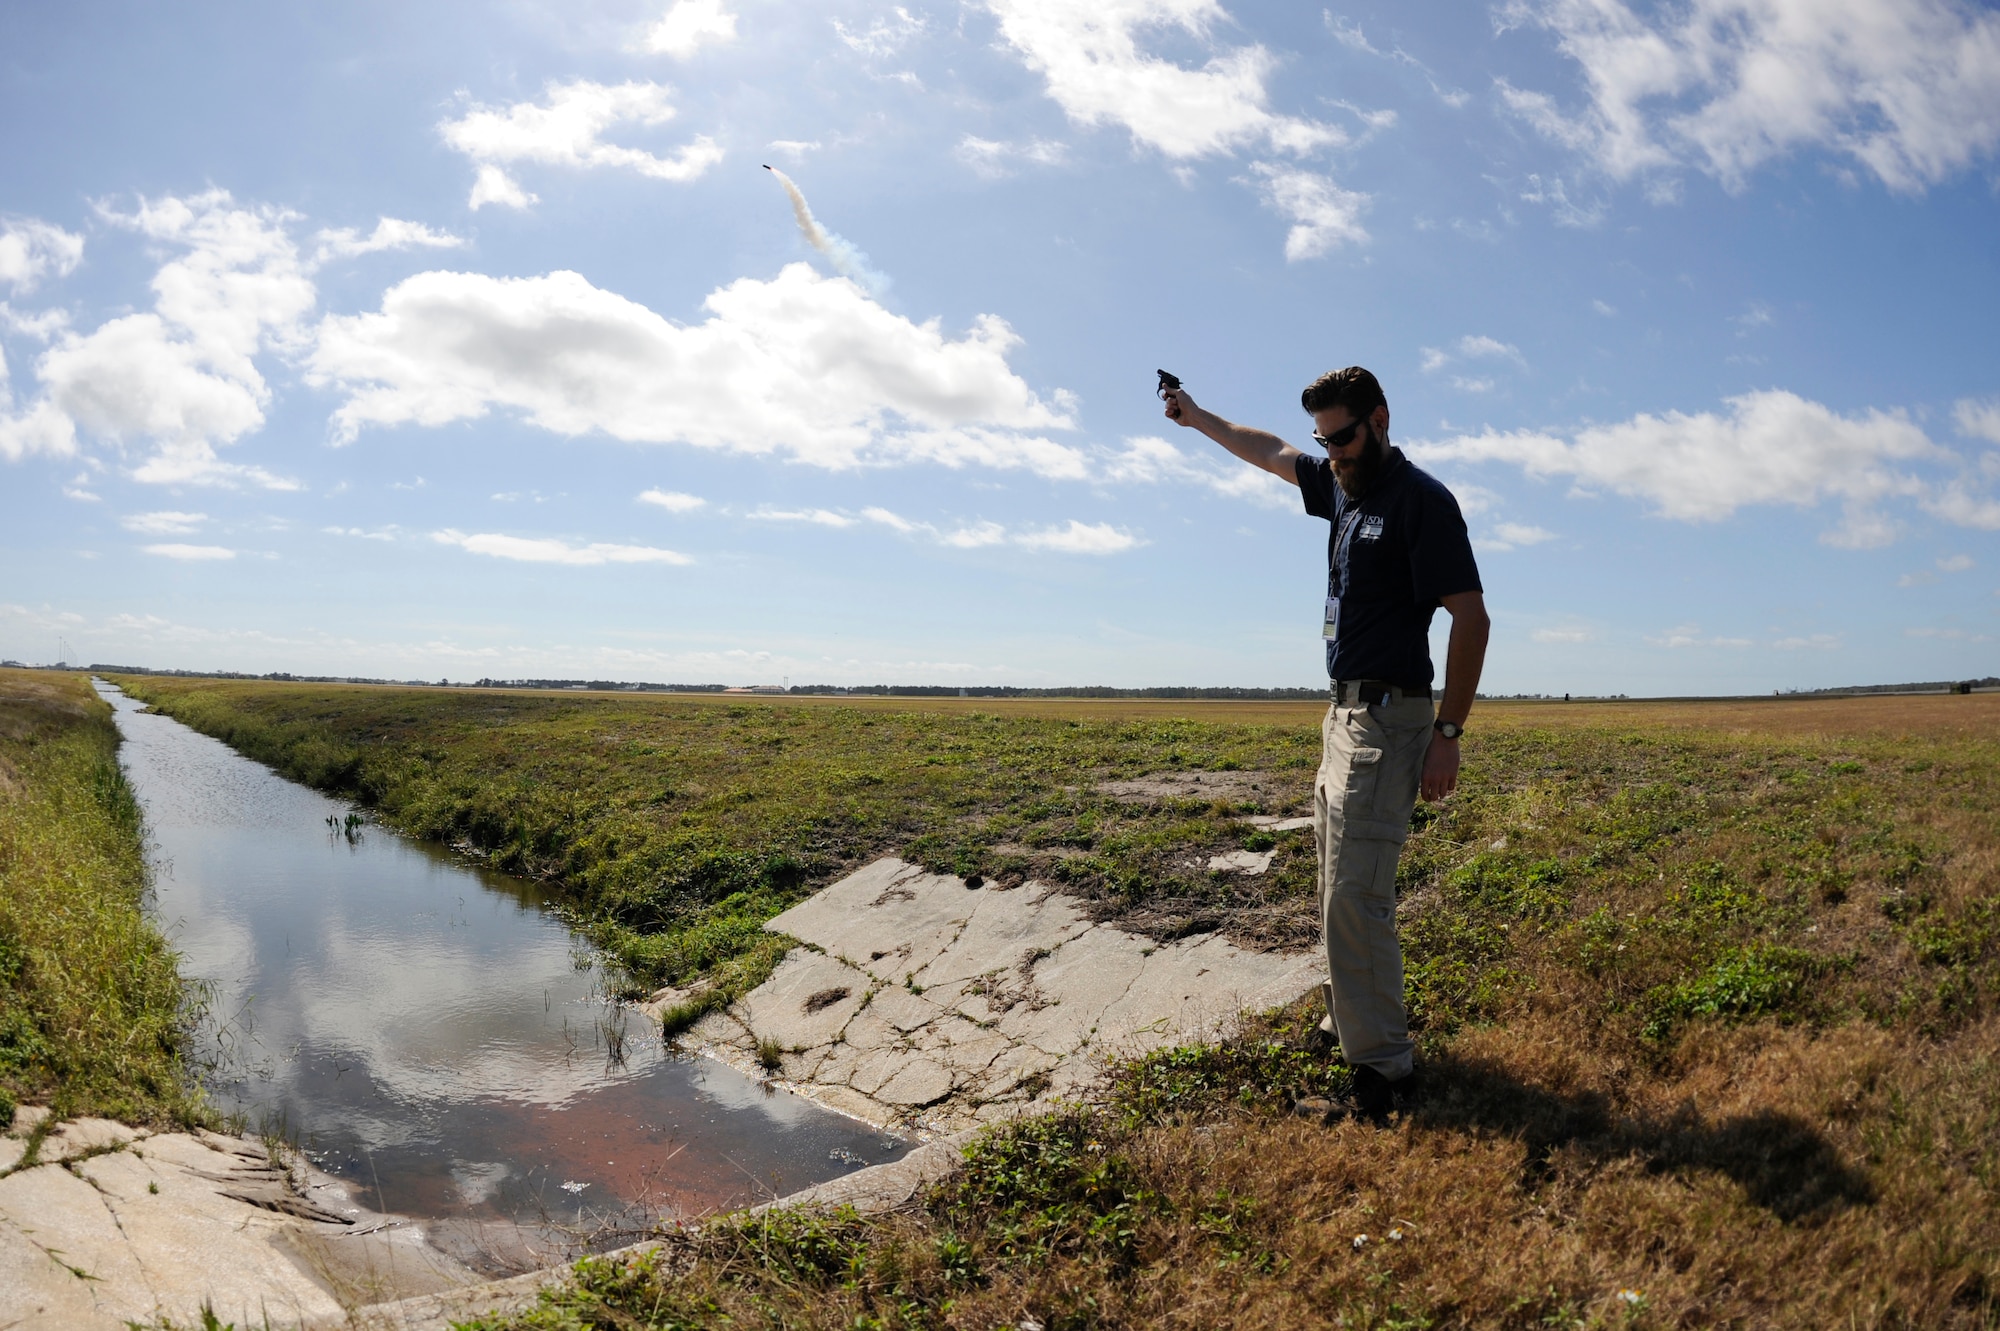 Kory McLellan, a wildlife biologist with the United States Department of Agriculture, uses pyrotechnics to disperse birds away from the airfield, Feb. 16, 2016, at MacDill Air Force Base, Fla. The loud noise of the pyrotechnics provides an effective tool to disperse birds and prevent bird strikes. (U.S. Air Force photo by Airman 1st Class Mariette Adams) 